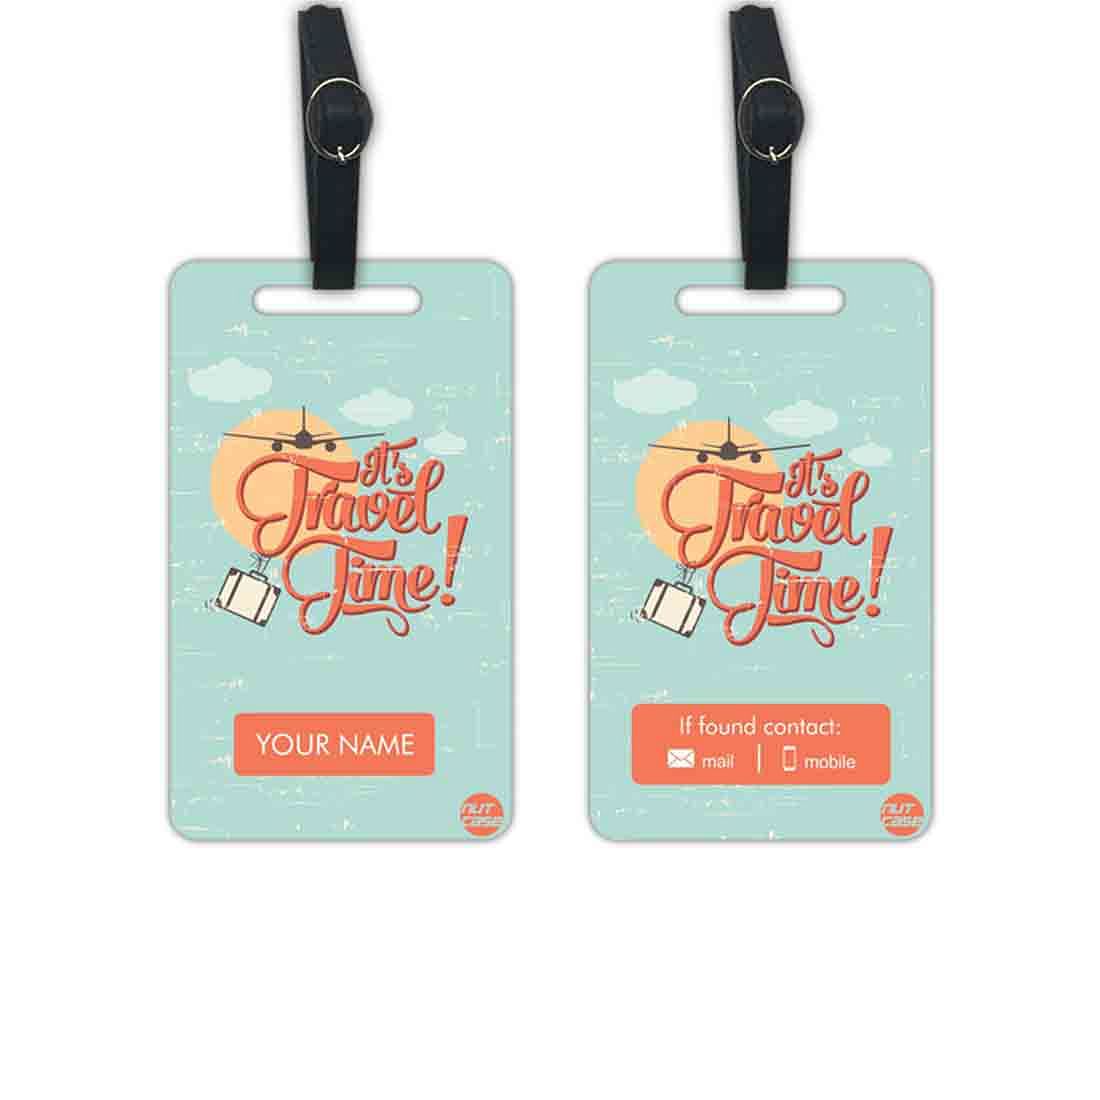 Fancy Personalized Travel Luggage Tags - Add your Name - Set of 2 Nutcase